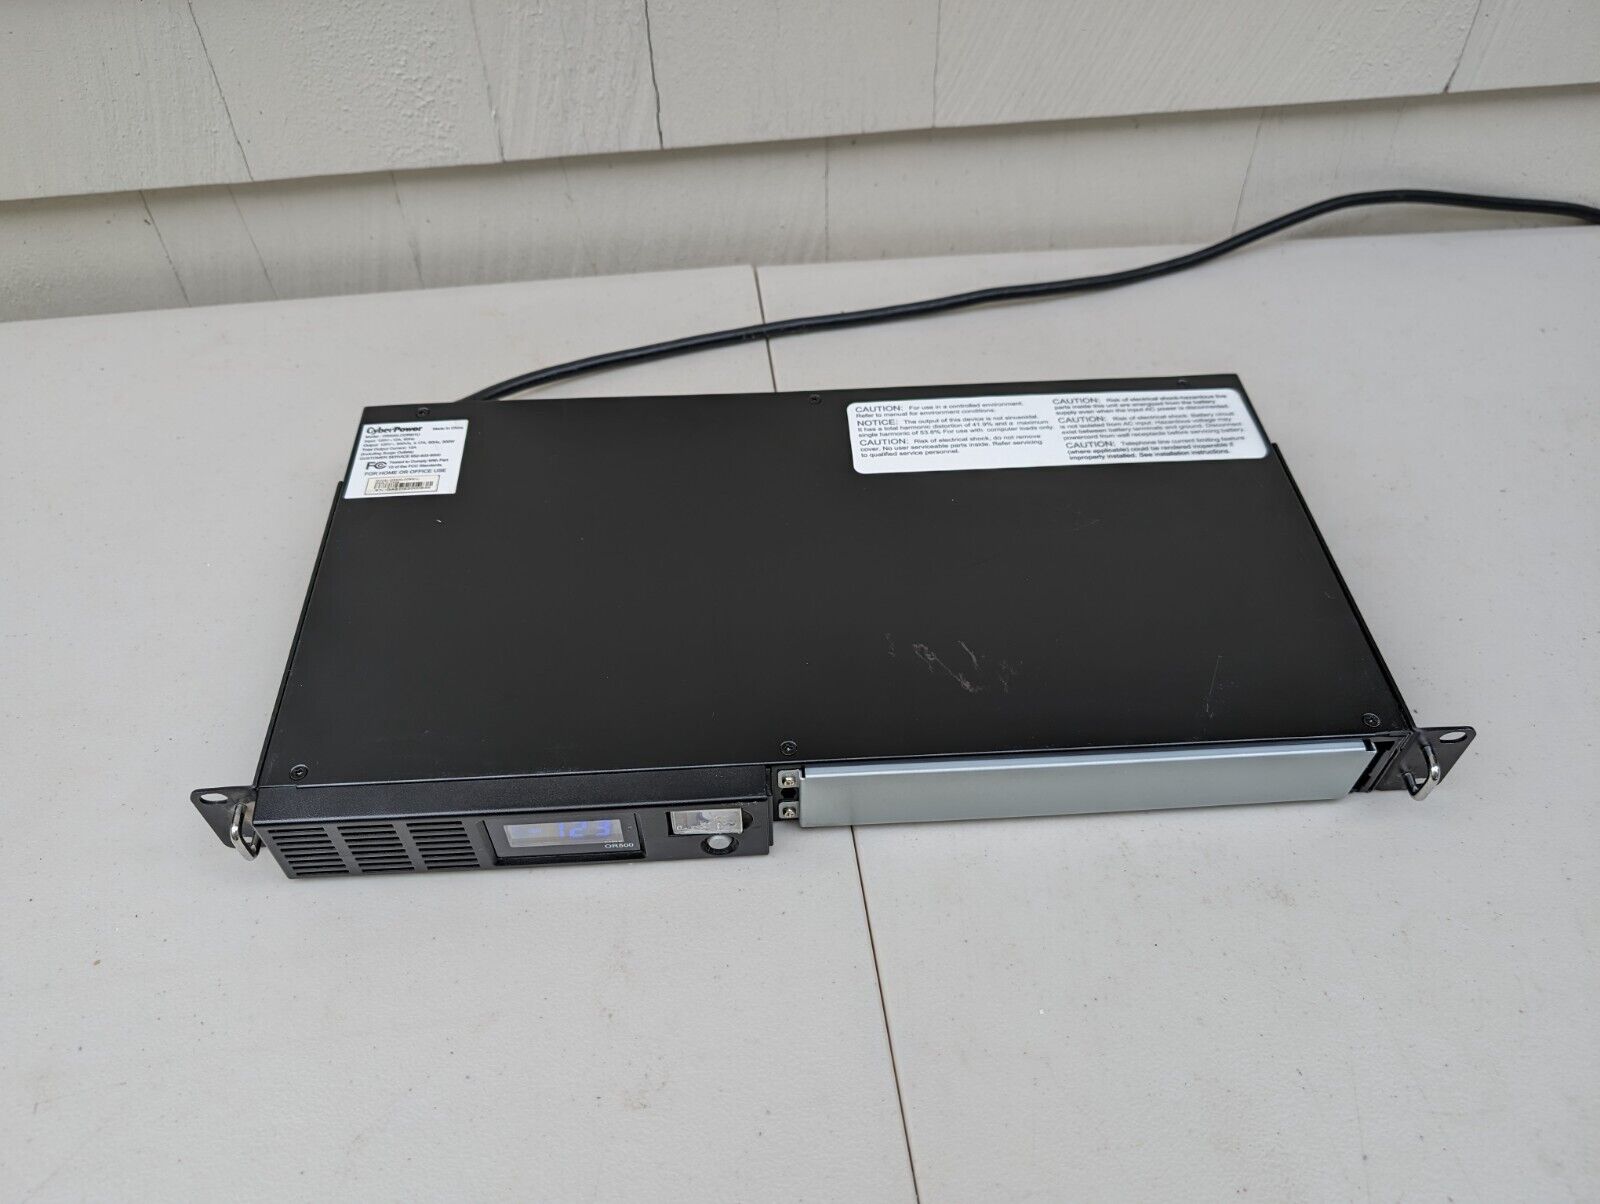 CyberPower (OR700LCDRM1U) UPS System